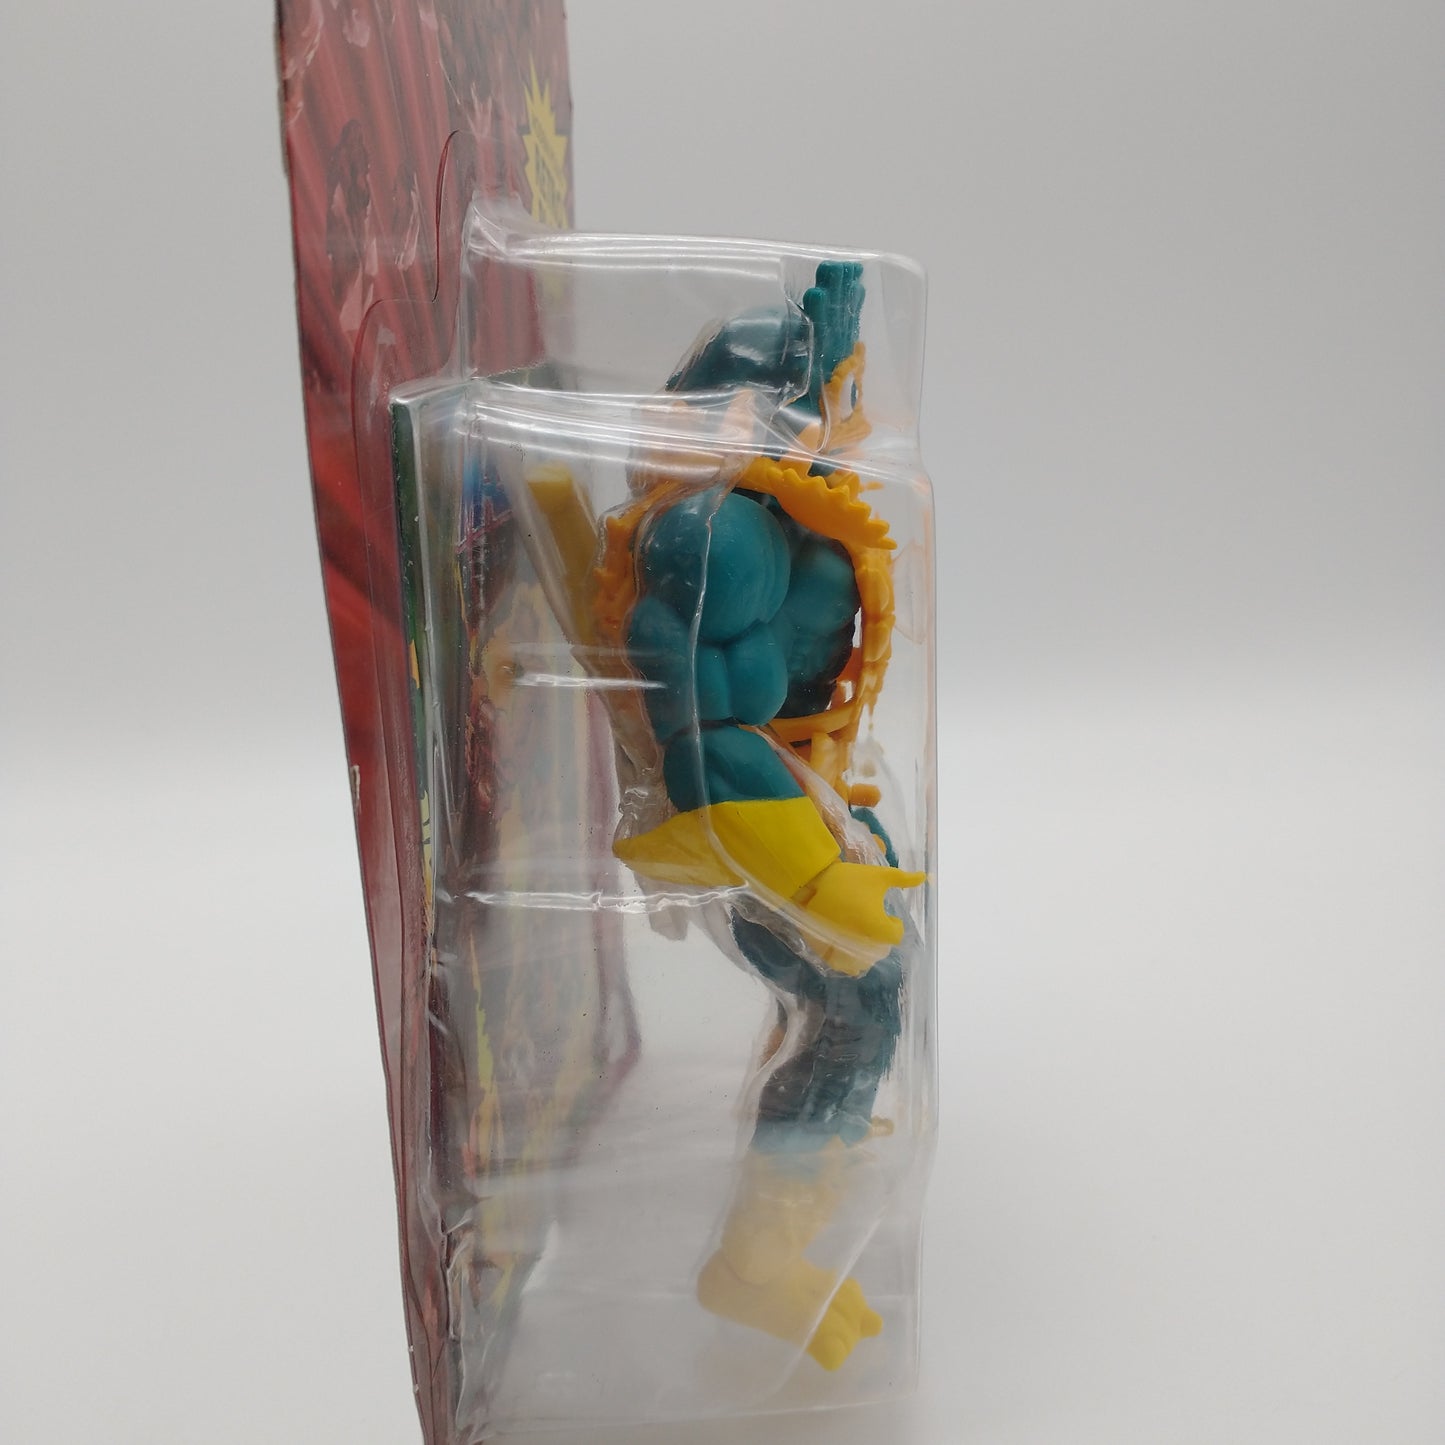 A picture of the right side of the cart and bubble. The figure is inside.